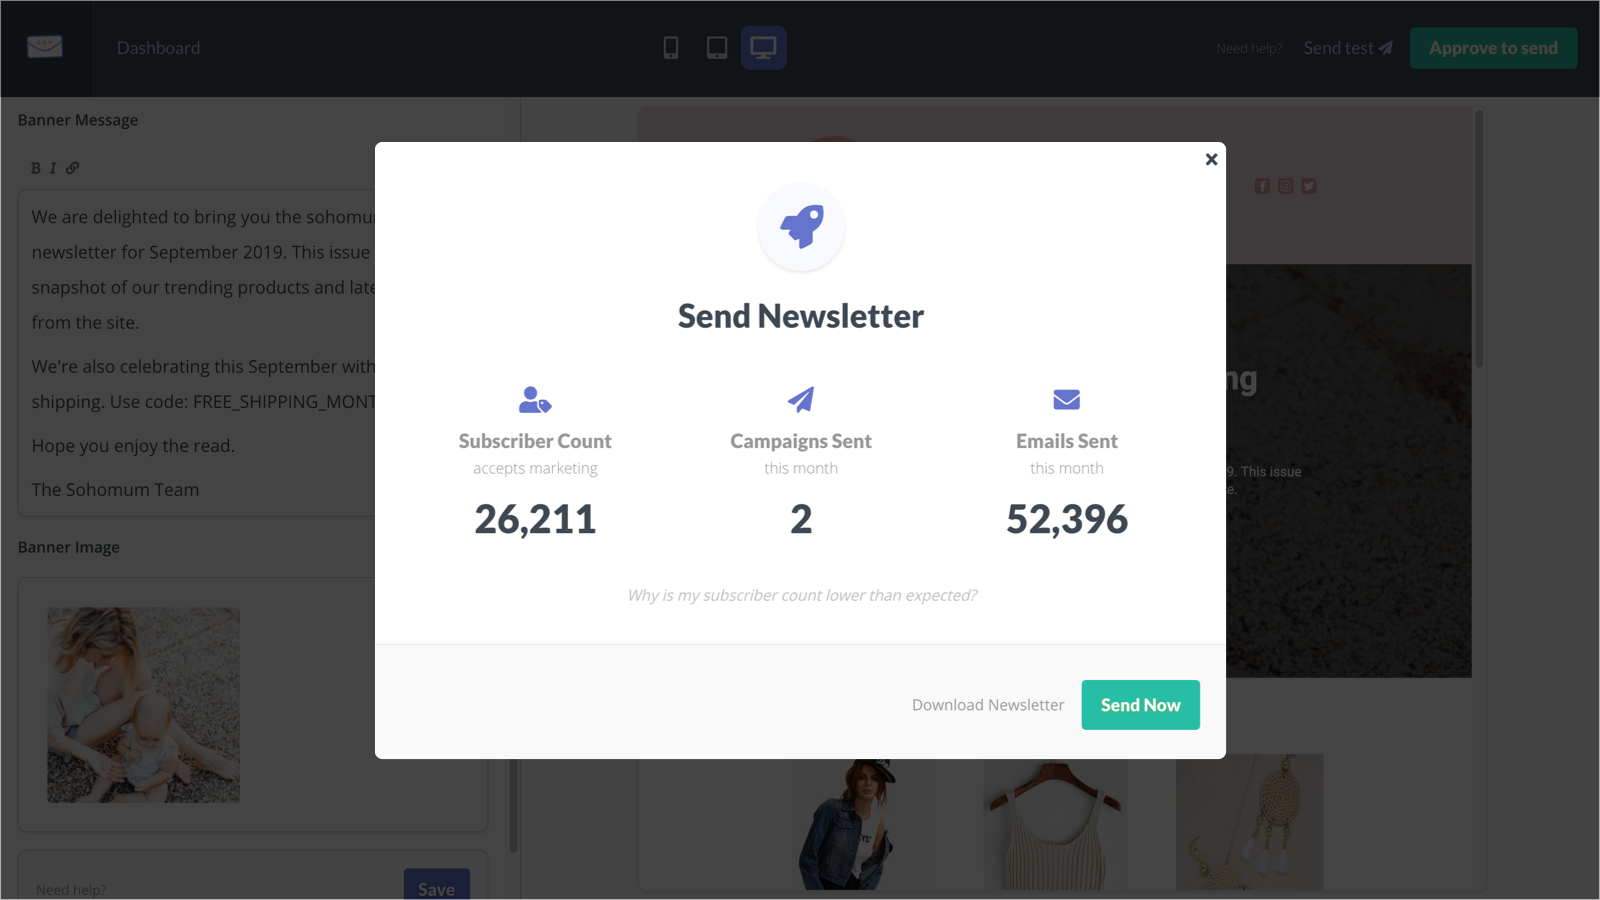 Approve content, then export or send newsletters